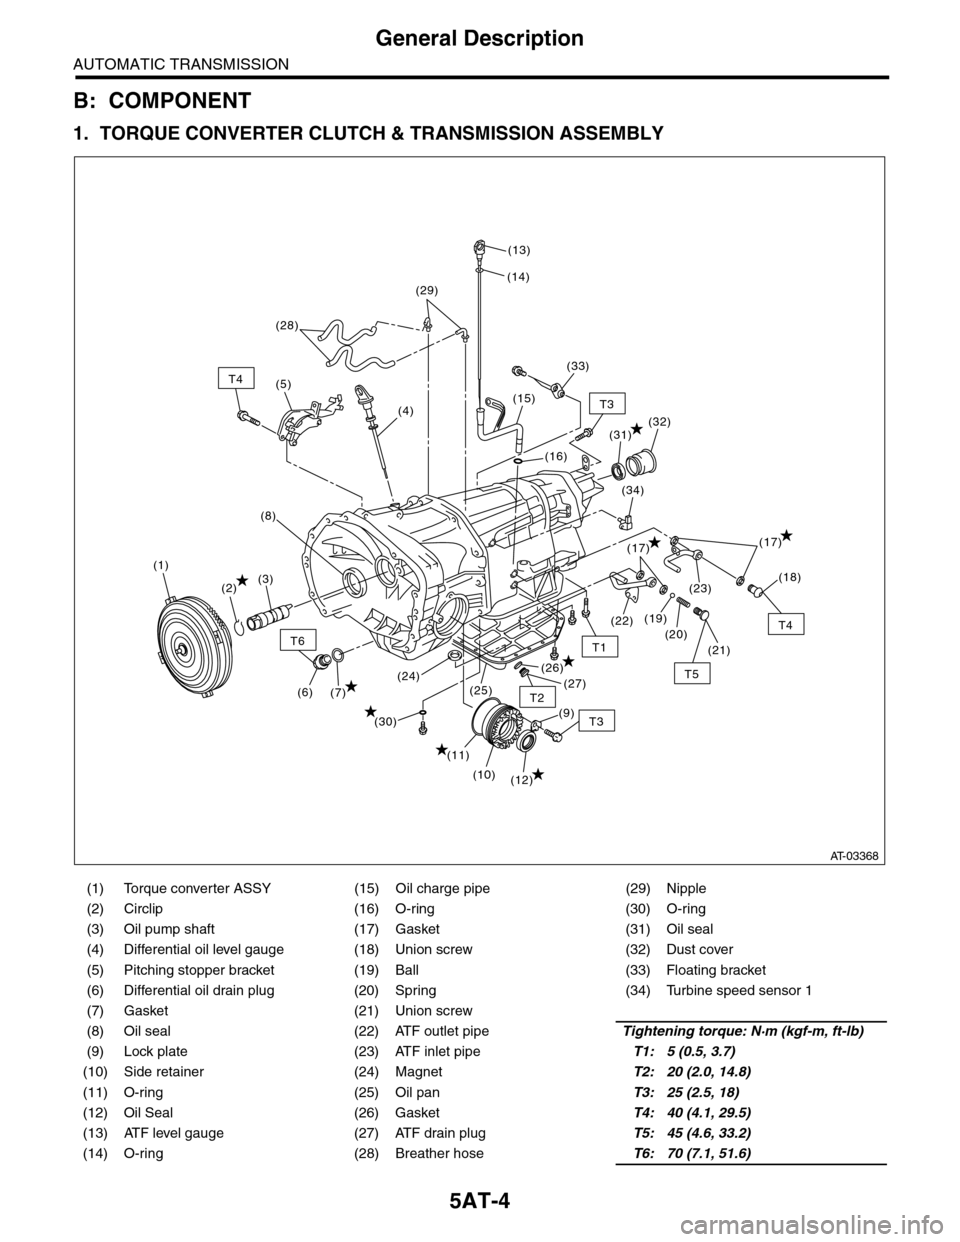 SUBARU TRIBECA 2009 1.G Service Workshop Manual 5AT-4
General Description
AUTOMATIC TRANSMISSION
B: COMPONENT
1. TORQUE CONVERTER CLUTCH & TRANSMISSION ASSEMBLY
(1) Torque converter ASSY (15) Oil charge pipe (29) Nipple
(2) Circlip (16) O-ring (30)